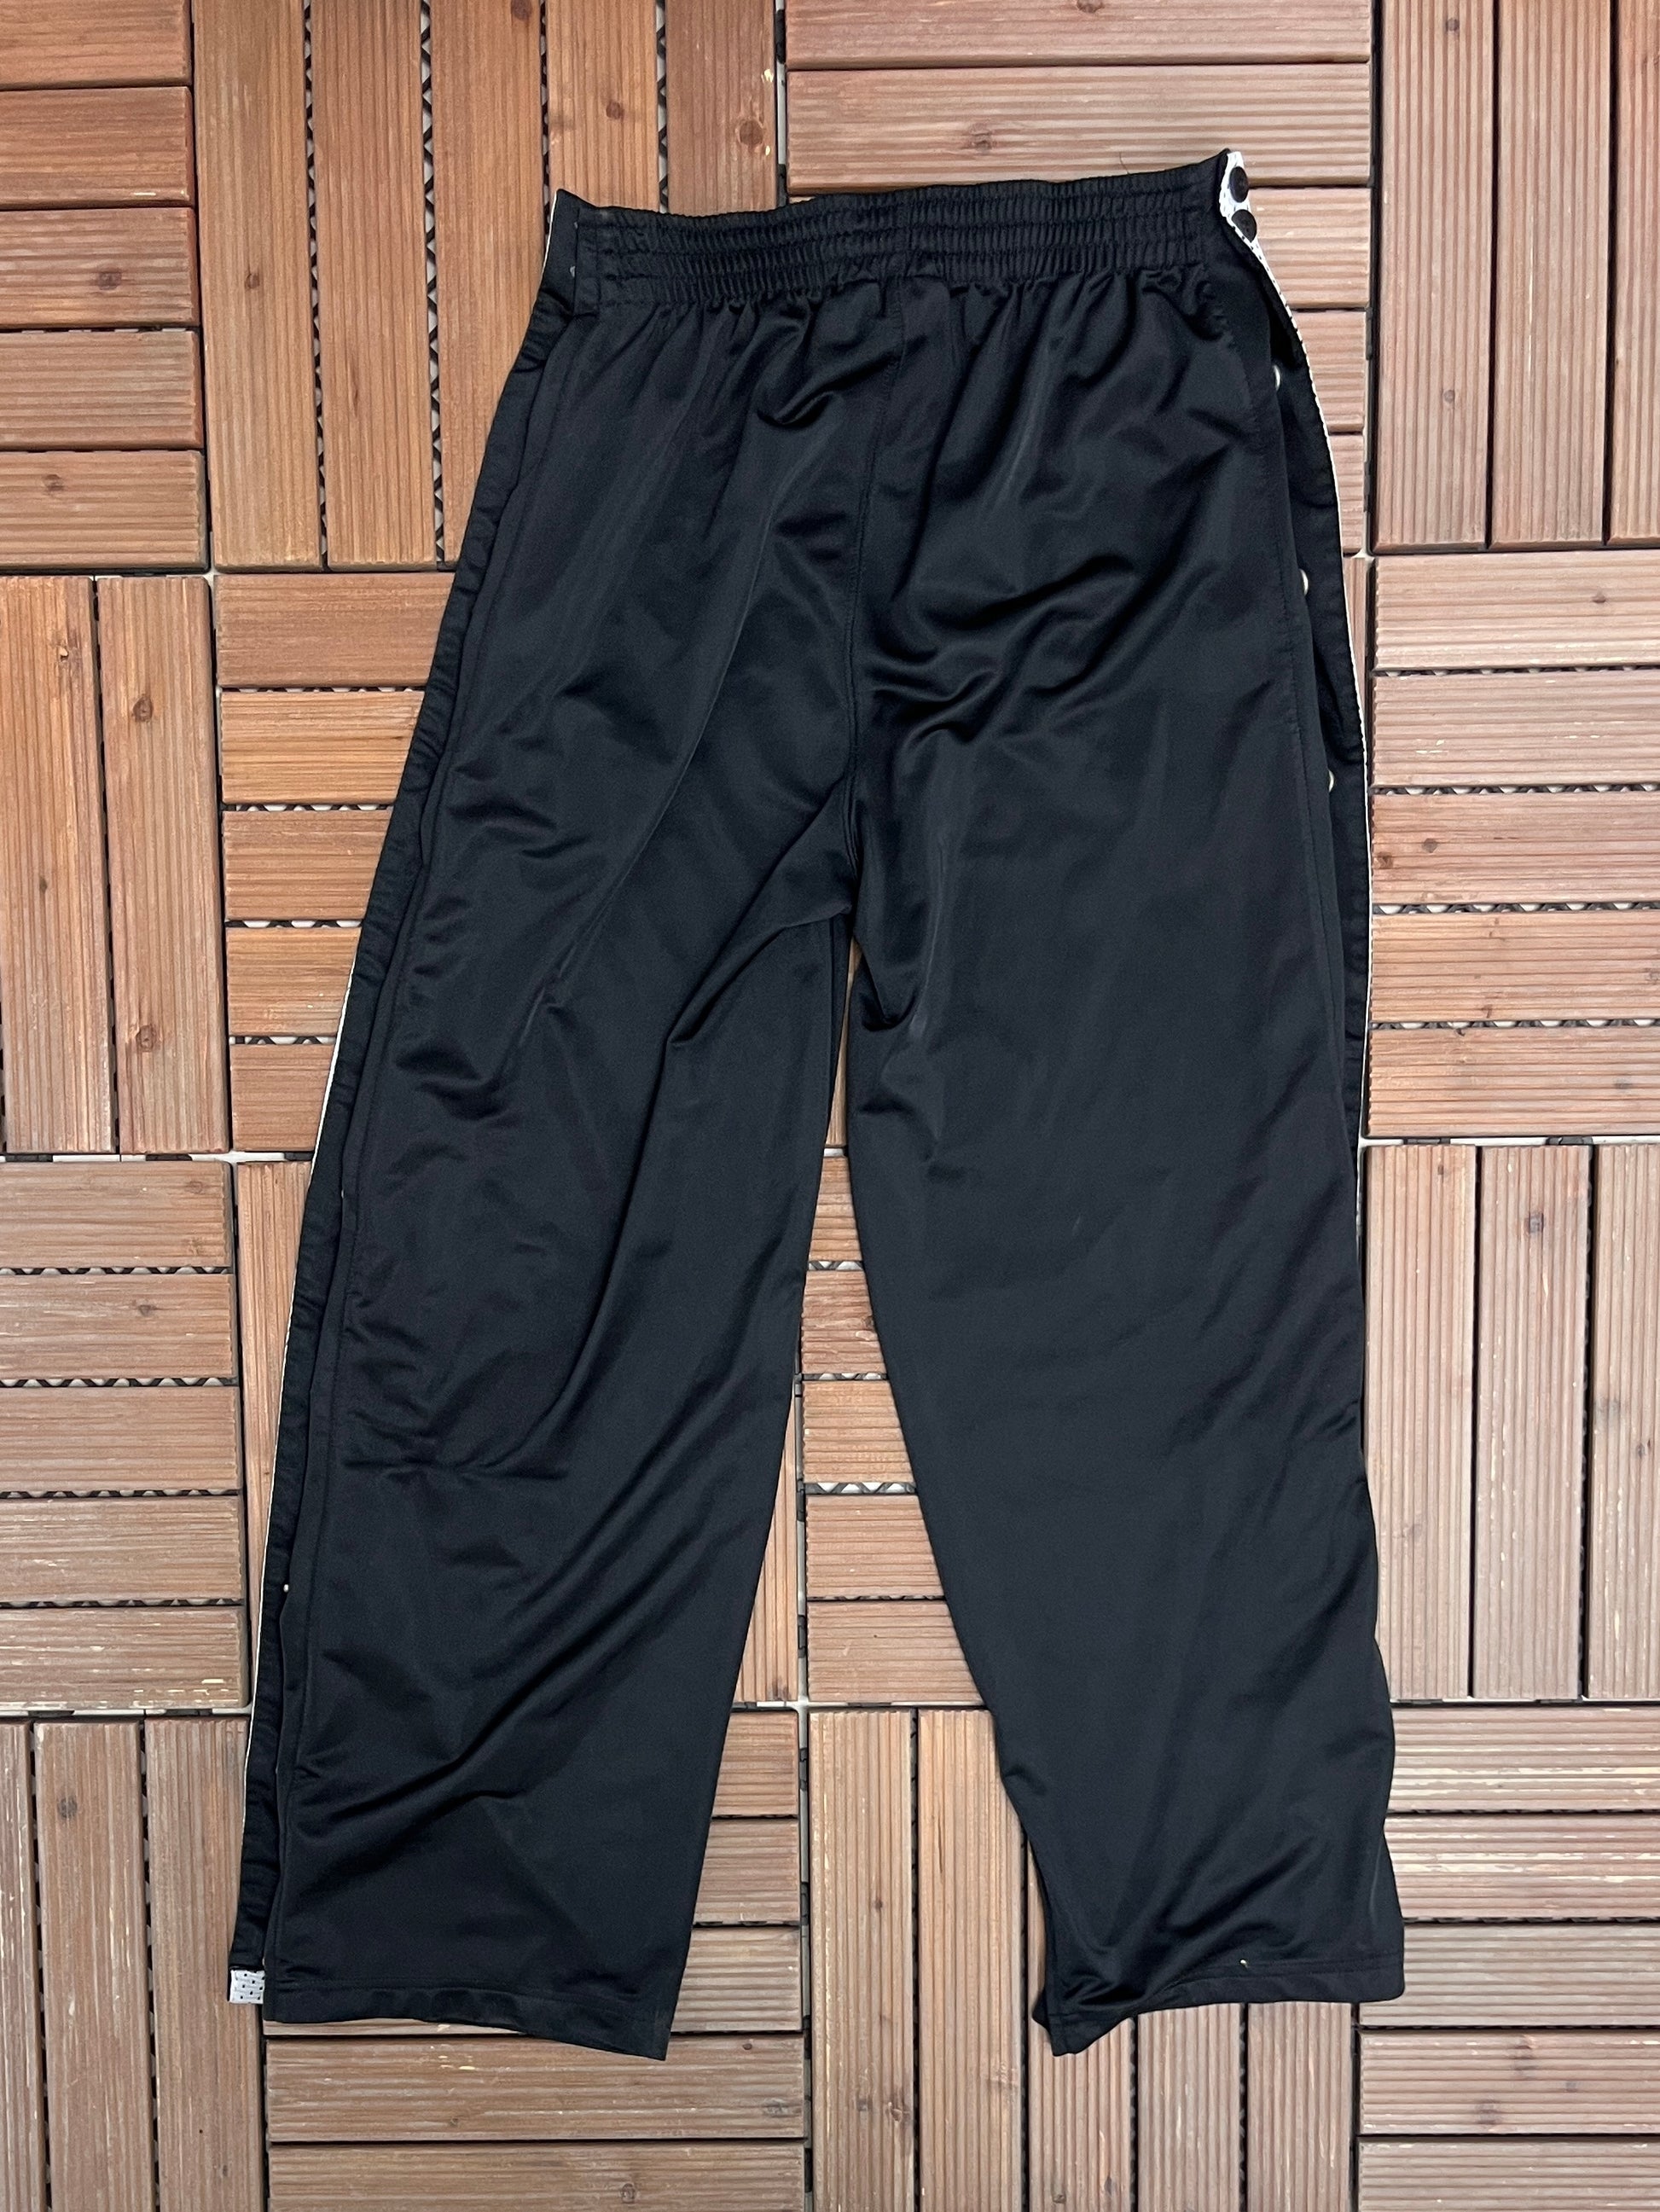 Starter Embroidered Graphic Track Pants, Size Small